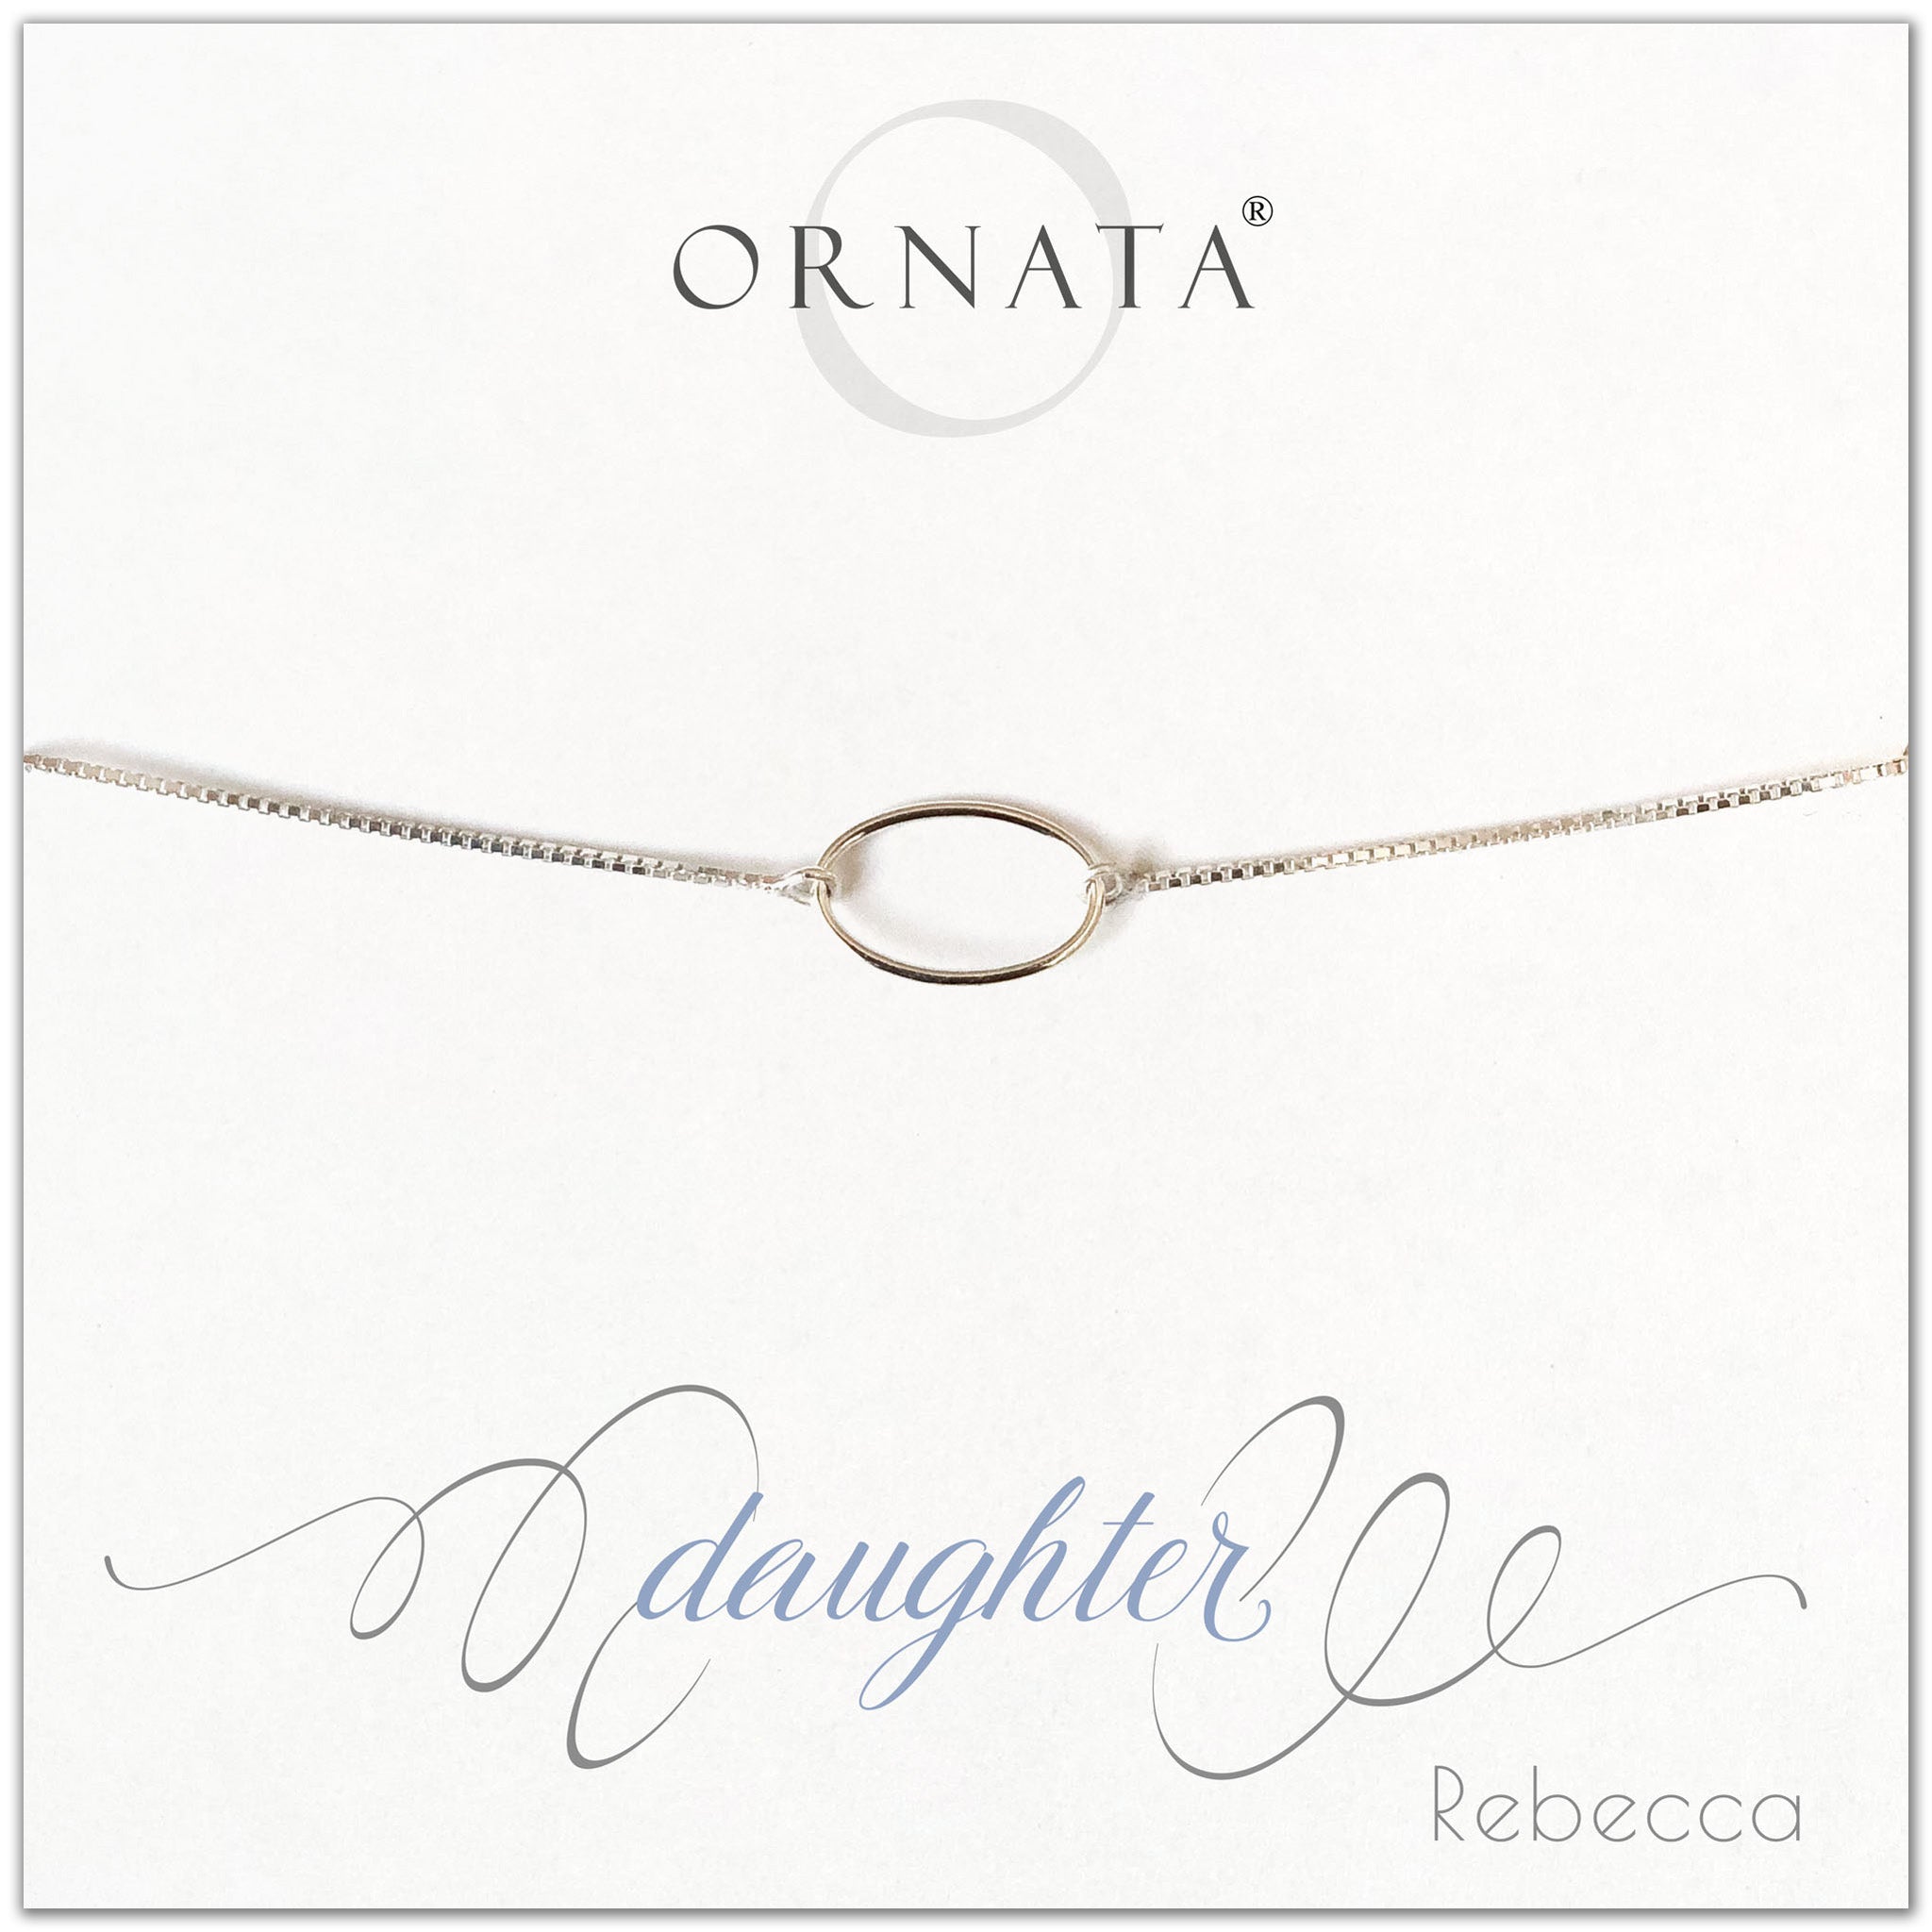 Granddaughter Personalised Silver Gold-Plated Name Ladies' Bolo Bracelet:  'Dear Sweet Granddaughter' Personalised Bracelet